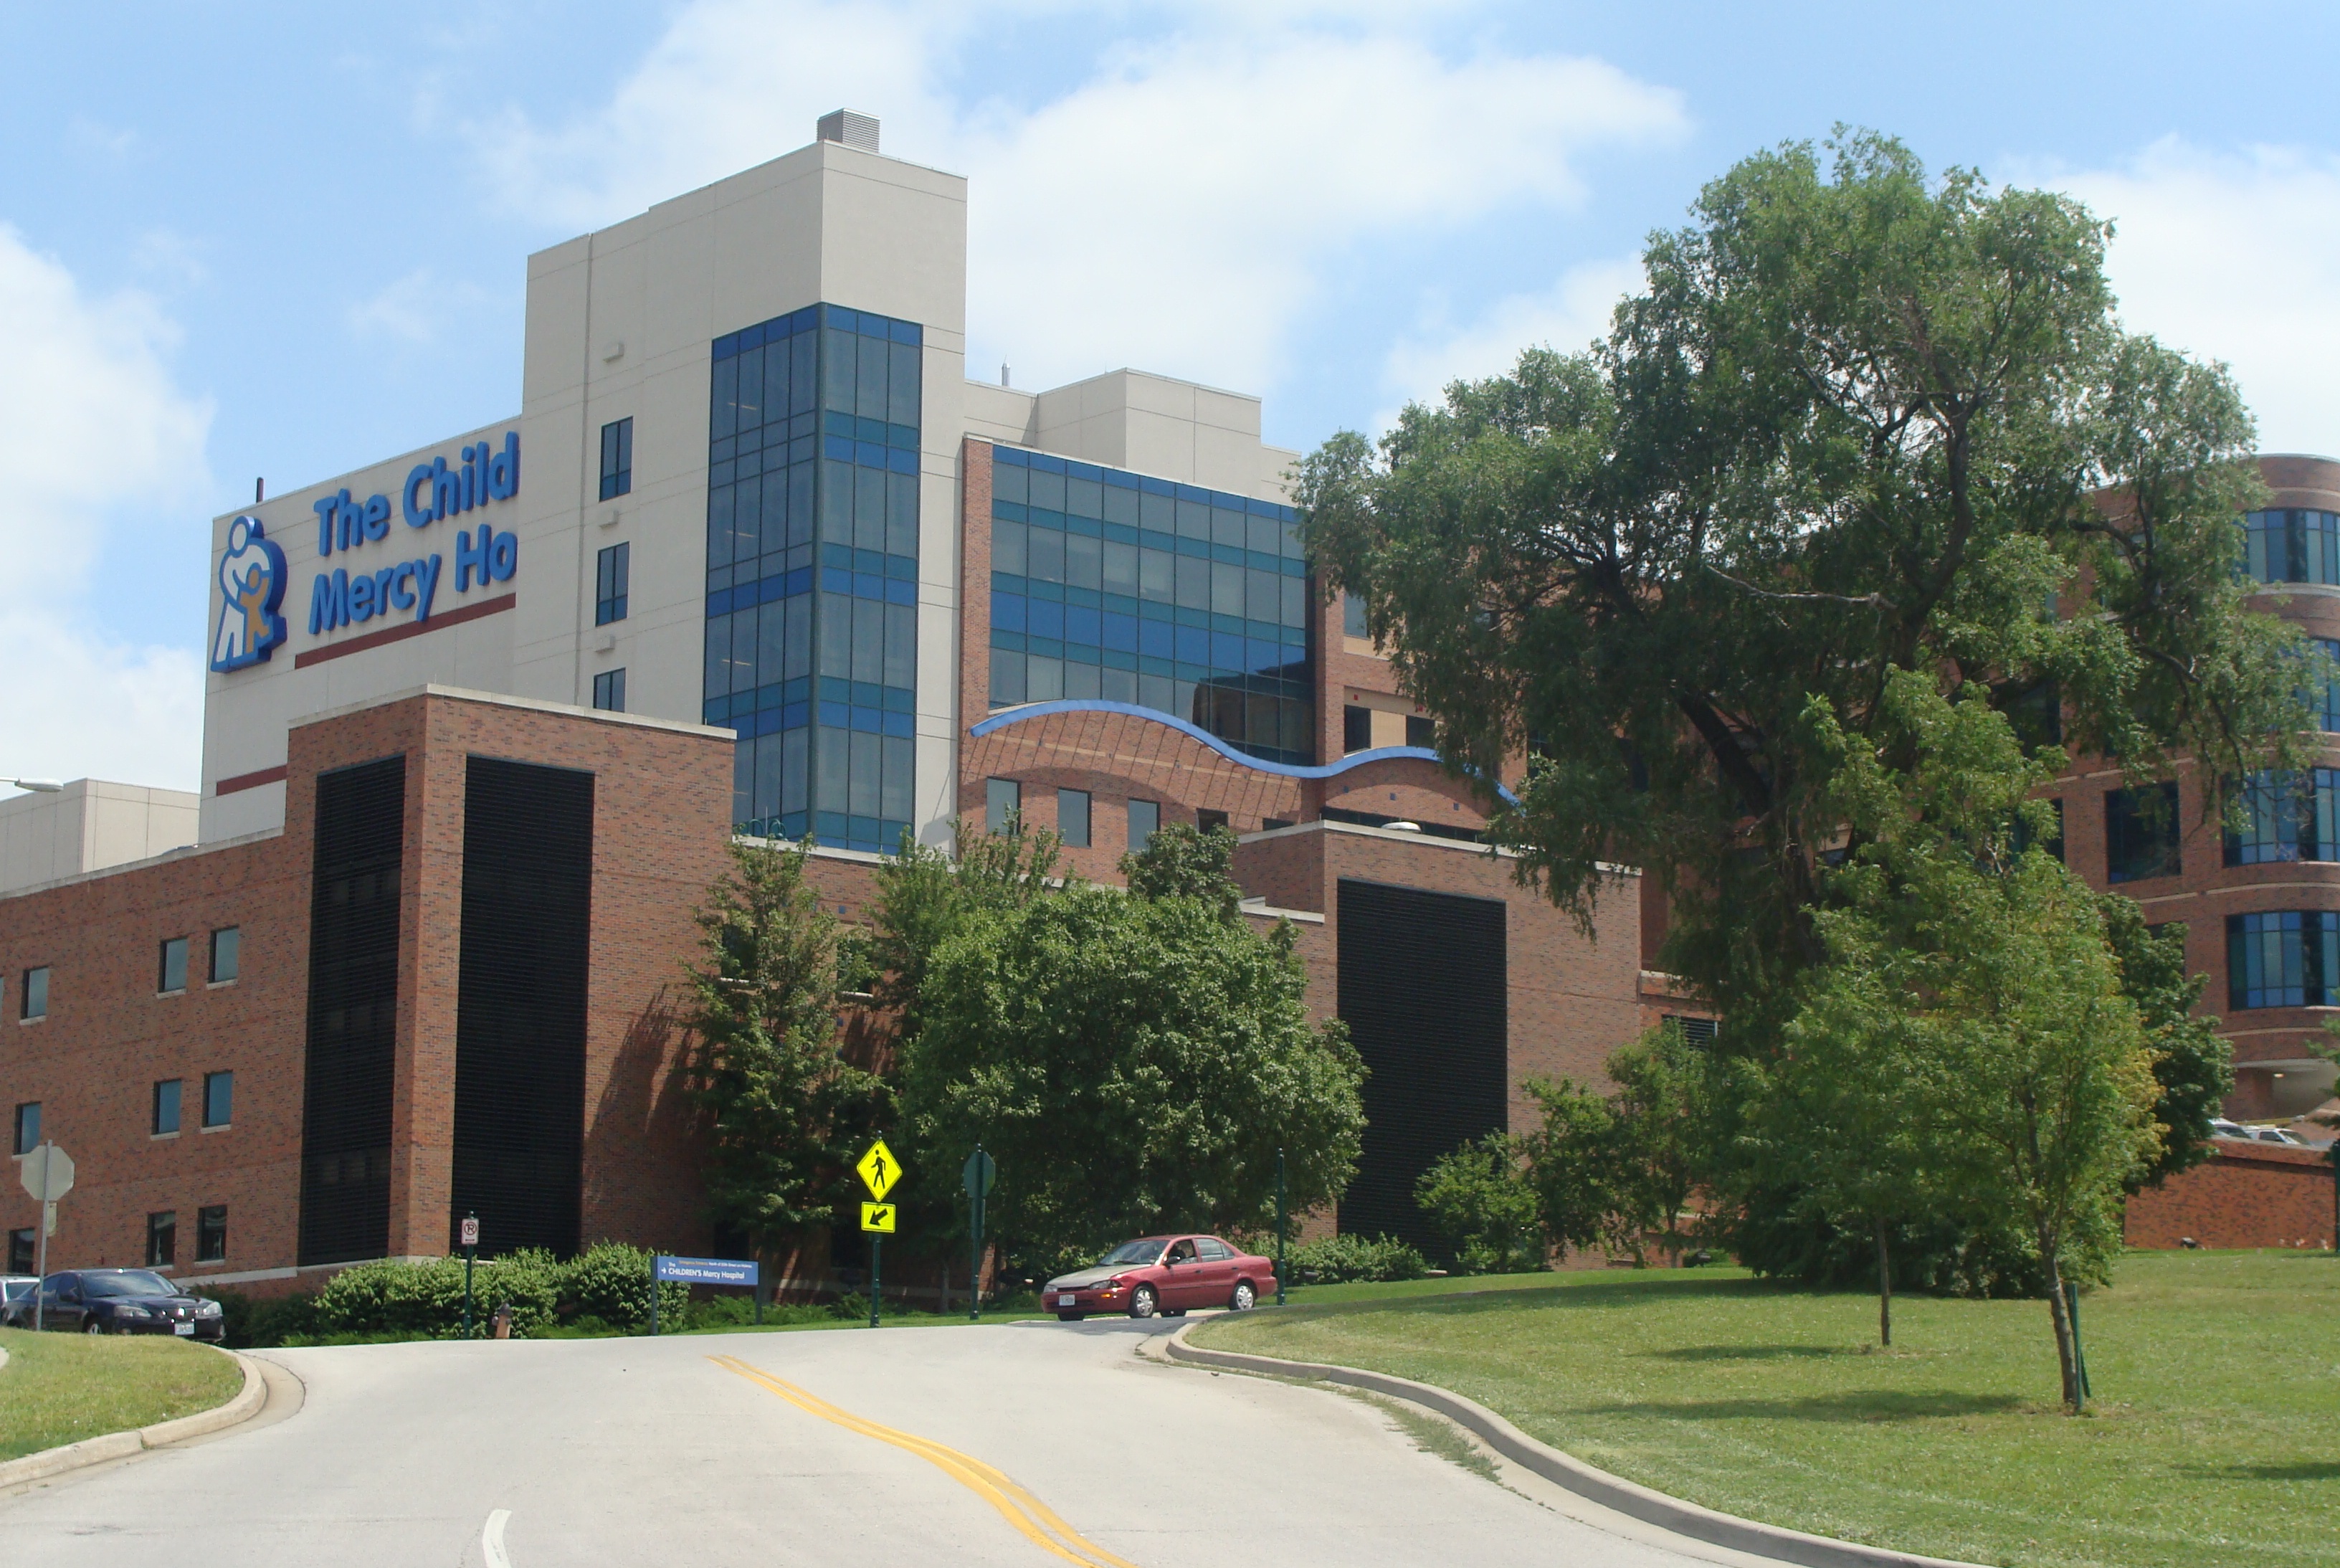 A picture of the Children’s Mercy Hospital building on a sunny day.